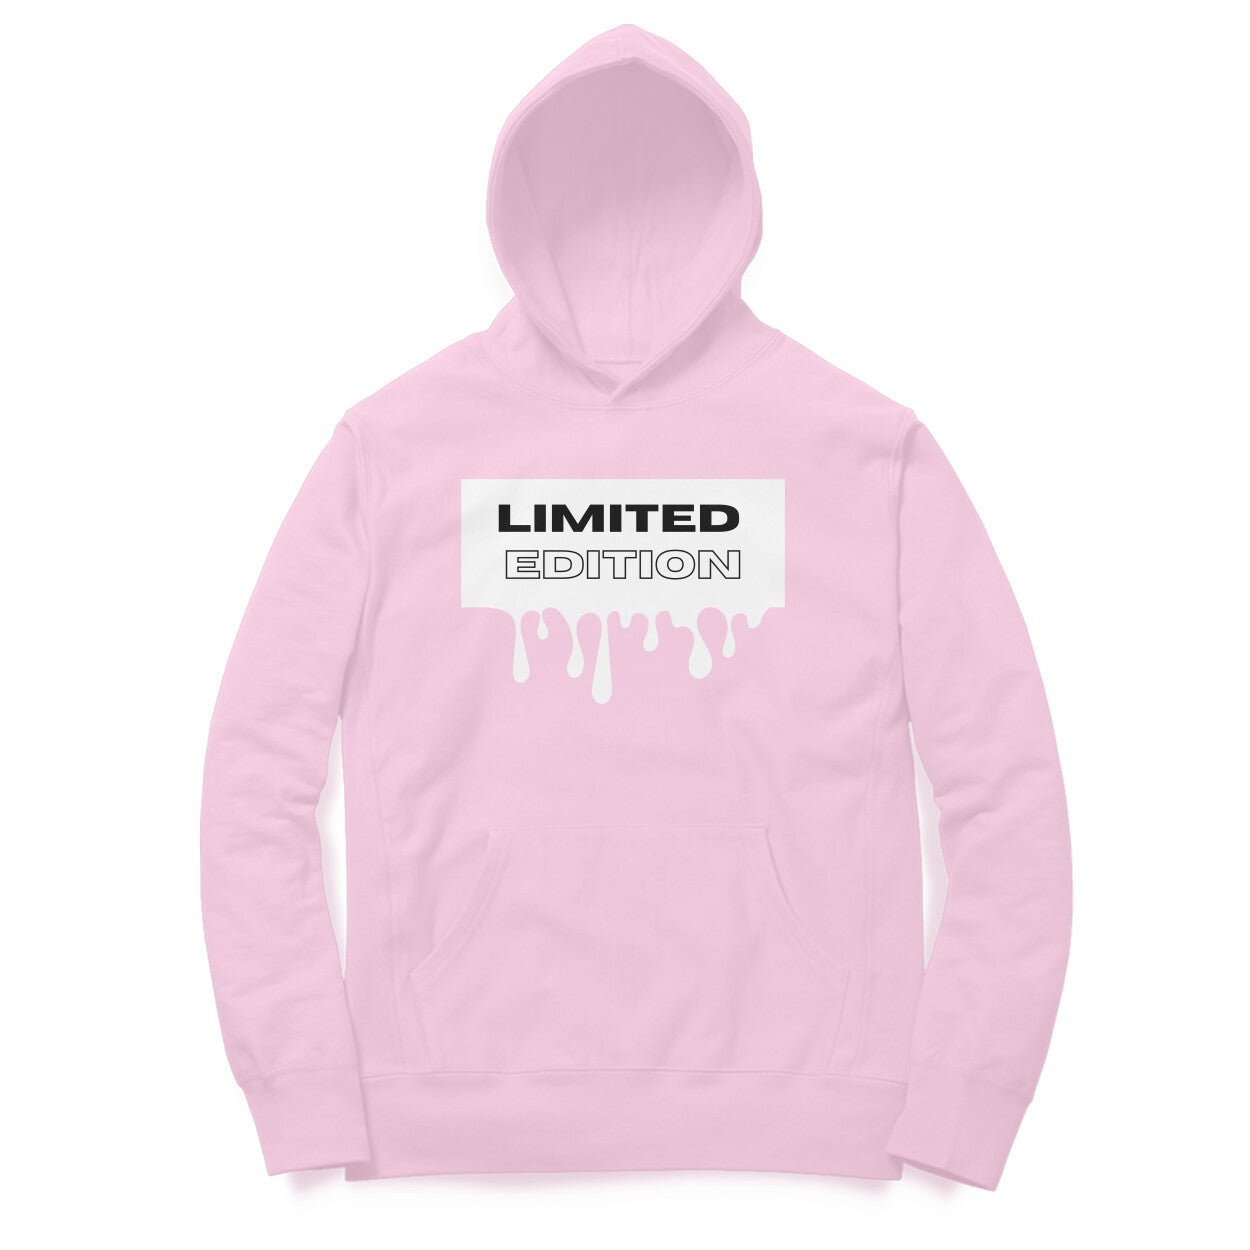 Limited Edition - Unisex Hoodie